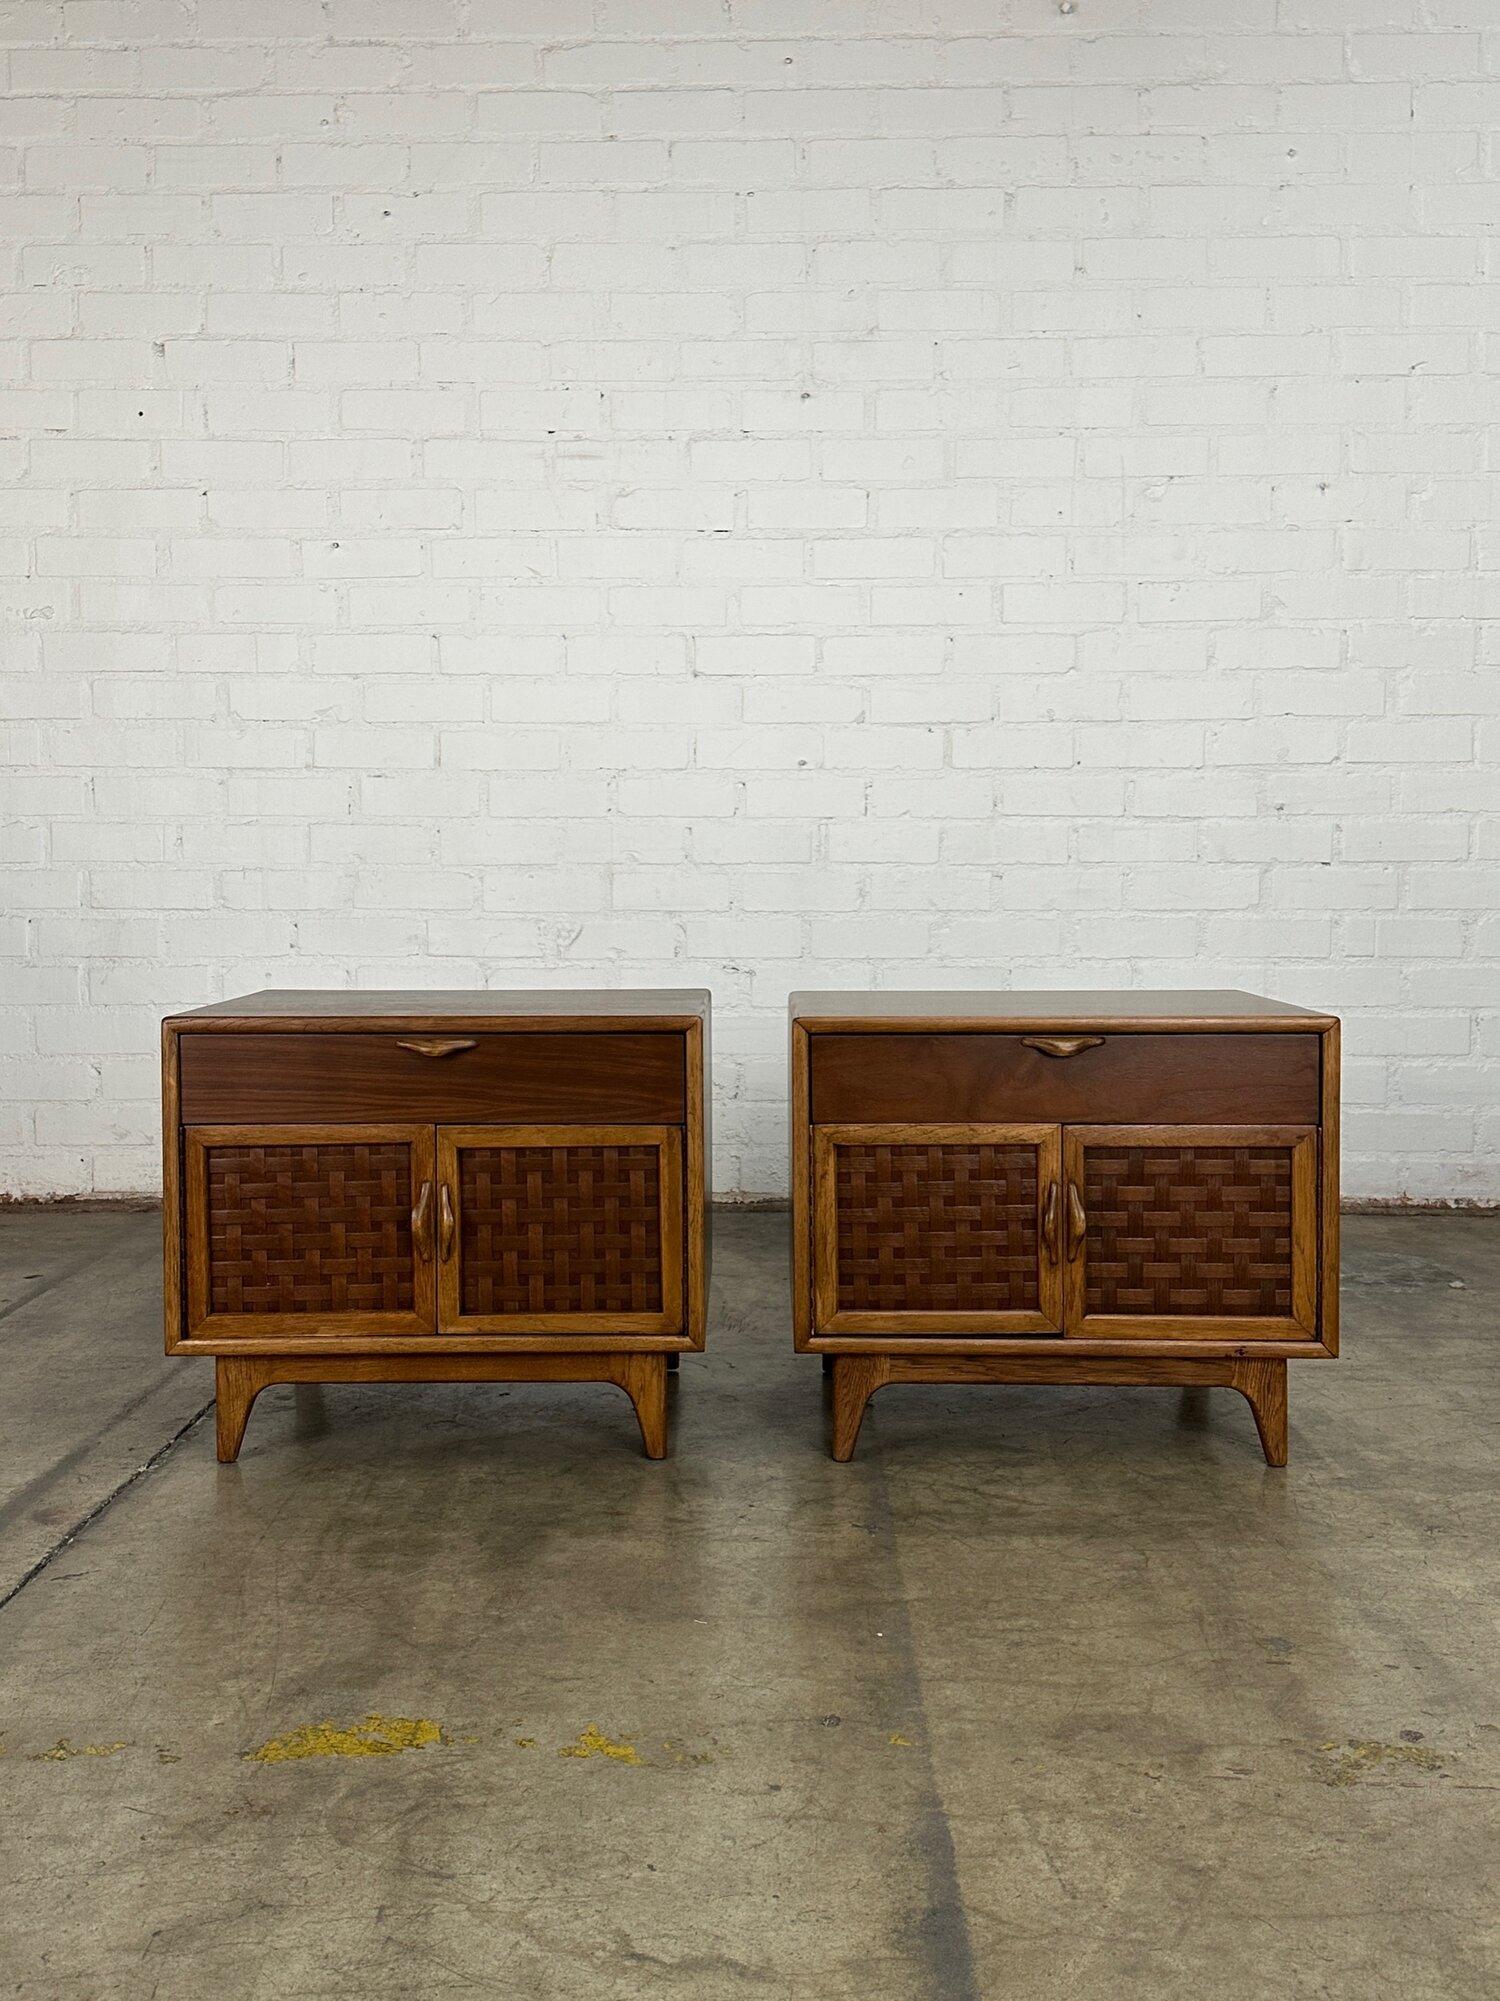 W26 D18 H22

Fully refinished 1960s Perception series walnut and oak nightstands by Lane. Nightstand feature woven detail wood paneled doors and a single drawer with a sculpted pull.

Price is for the pair *